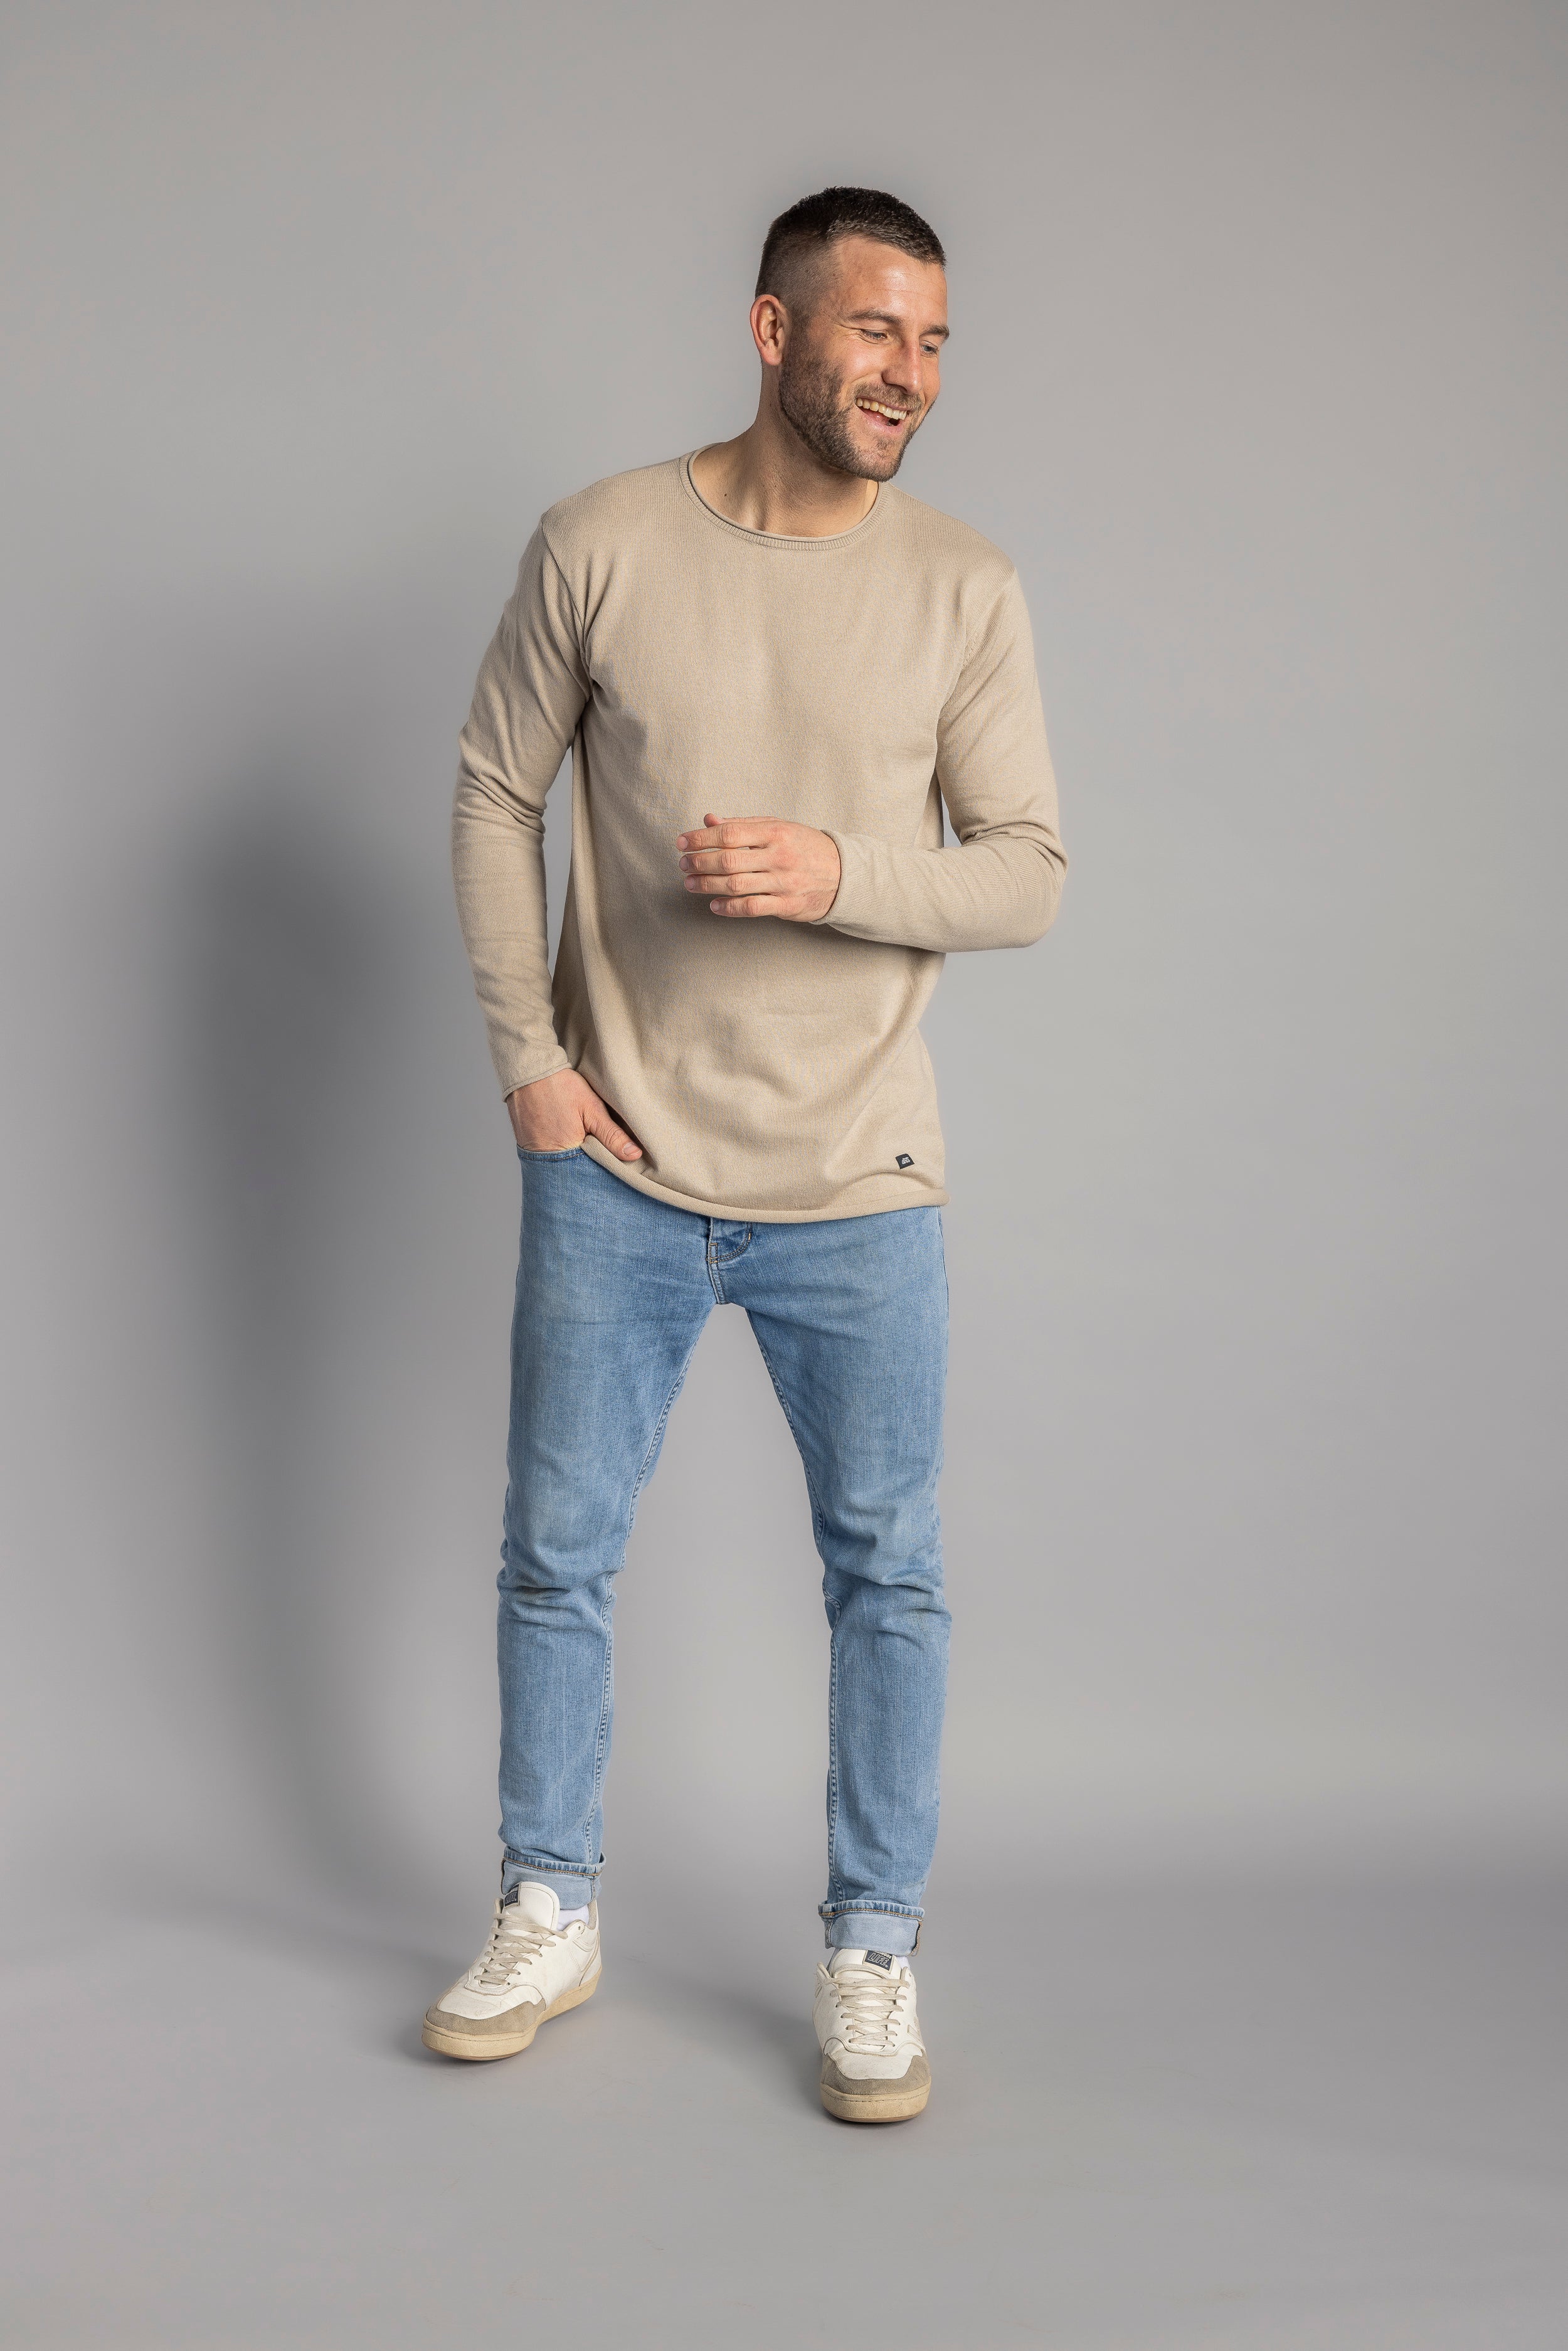 Beige knitted long-sleeve sweater made of 100% organic cotton from DIRTS